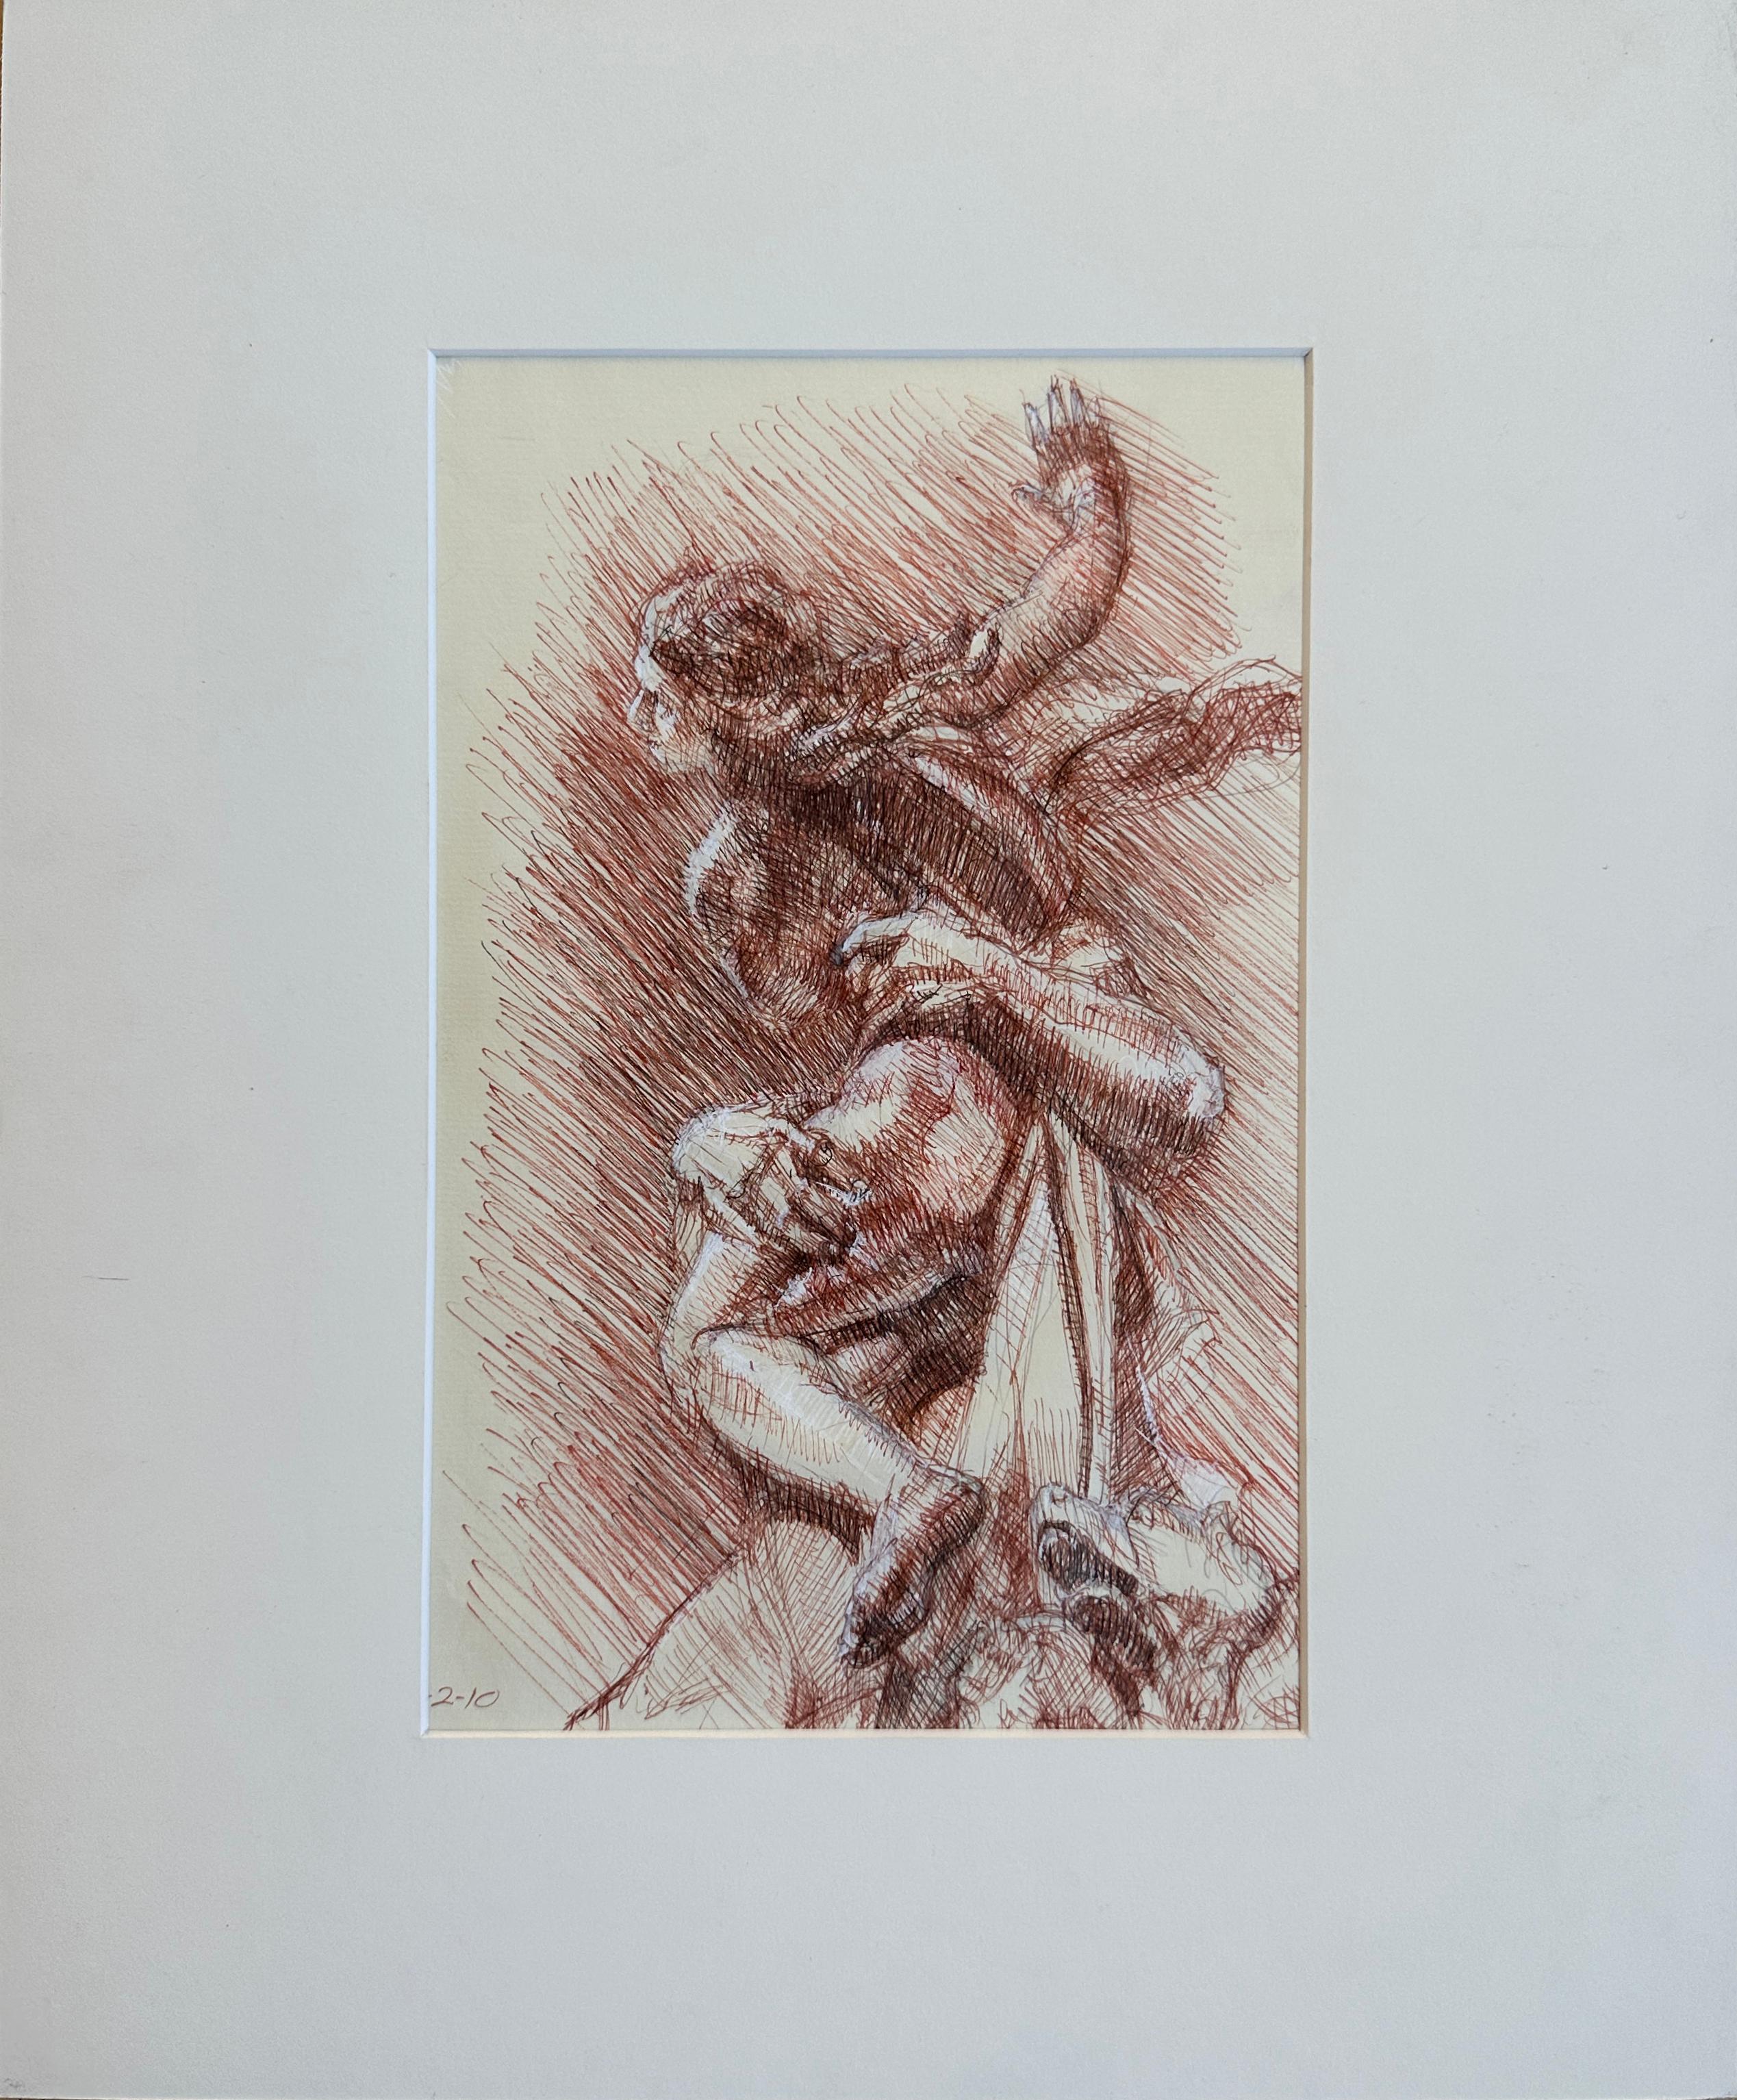 The Rape of Persephone by Bernini, Galleria Borghese -Original Sepia Ink Drawing - Contemporary Art by Christopher Ganz